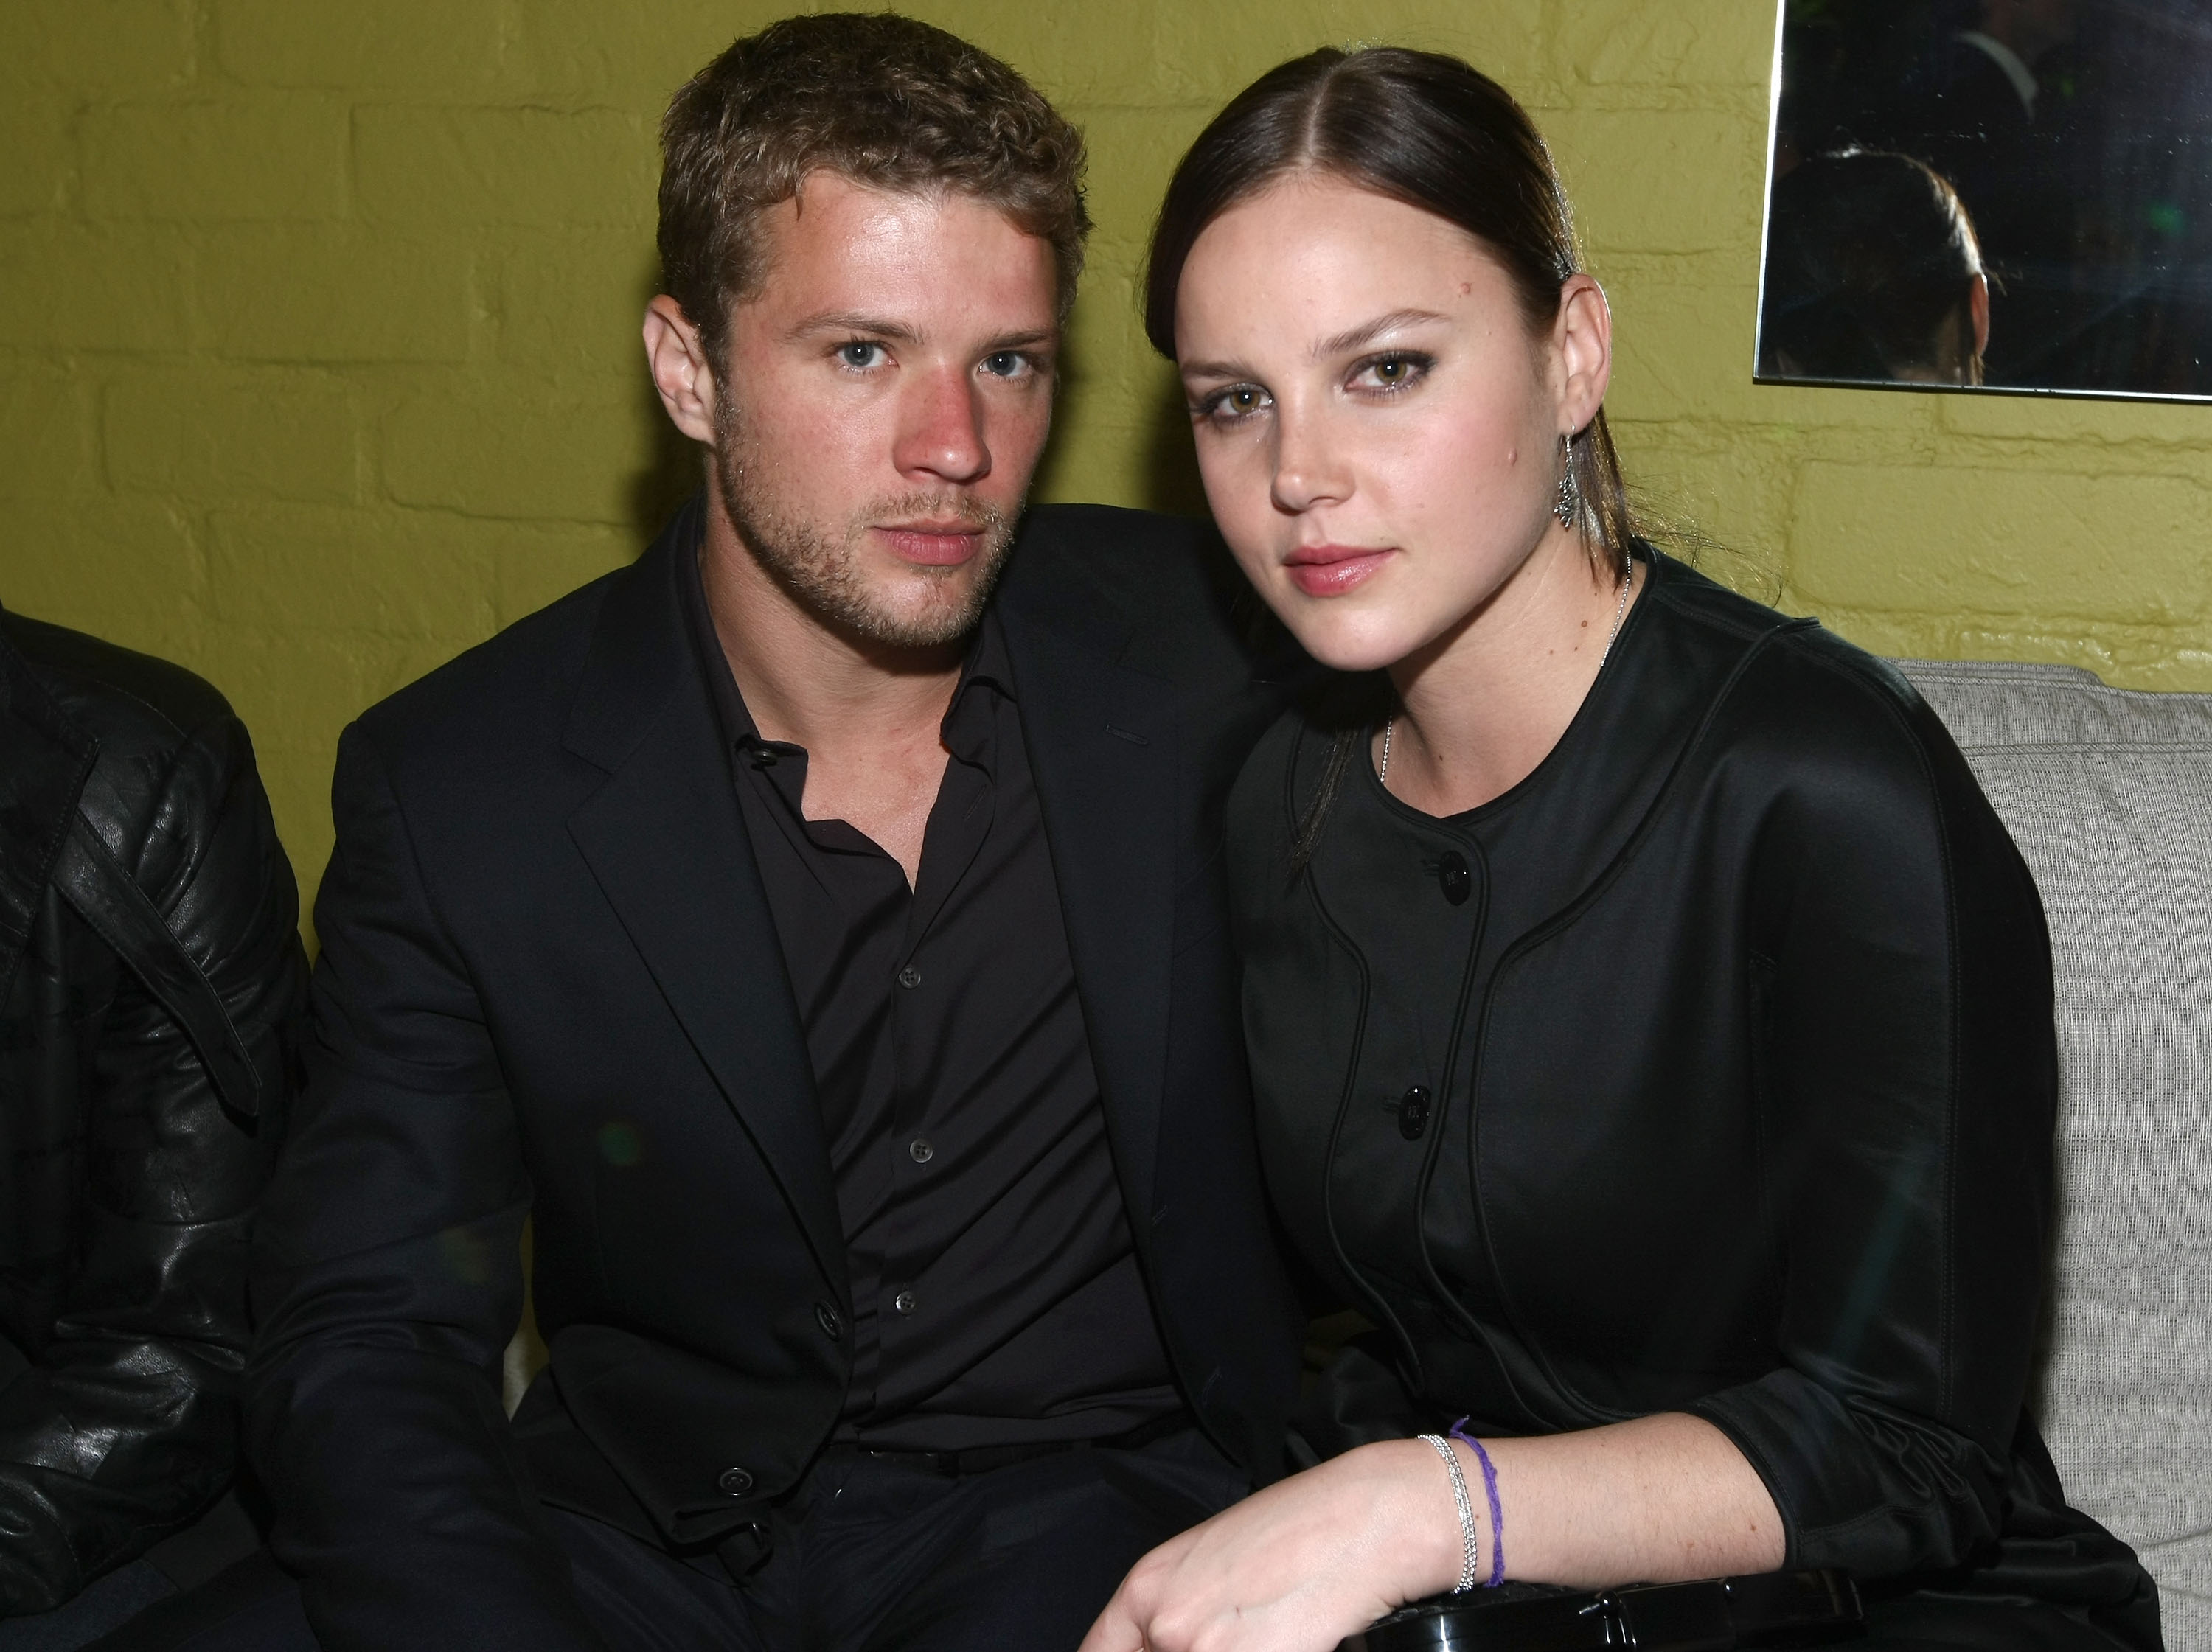 Ryan Phillippe and Abbie Cornish attend at the Australians In Film 2008 "Breakthrough Awards" held at the Avalon Hotel, on June 5, 2008, in Los Angeles, California. | Source: Getty Images